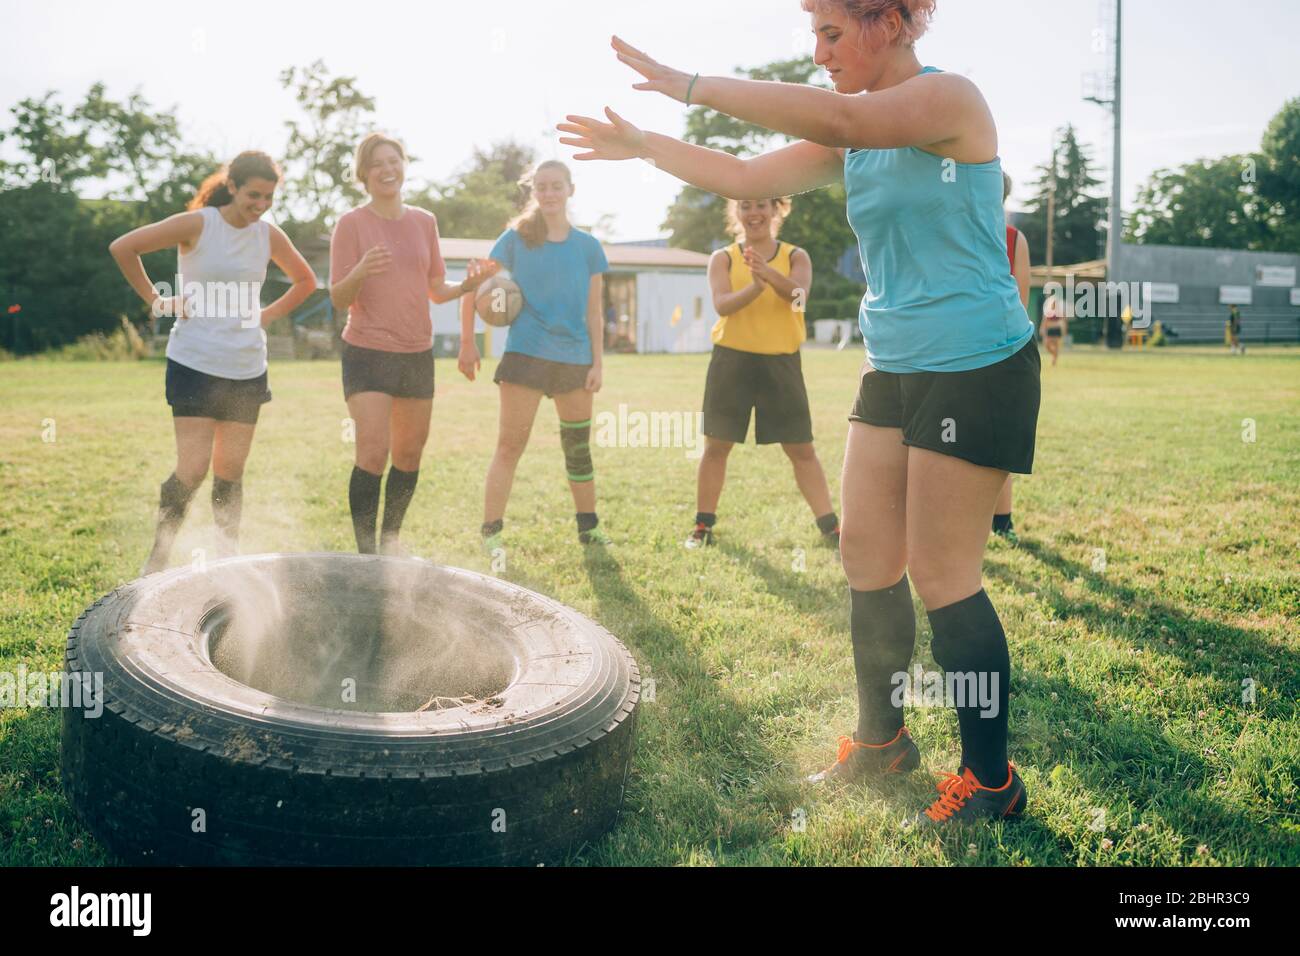 Six women at rugby training one having just thrown a tyre. Stock Photo